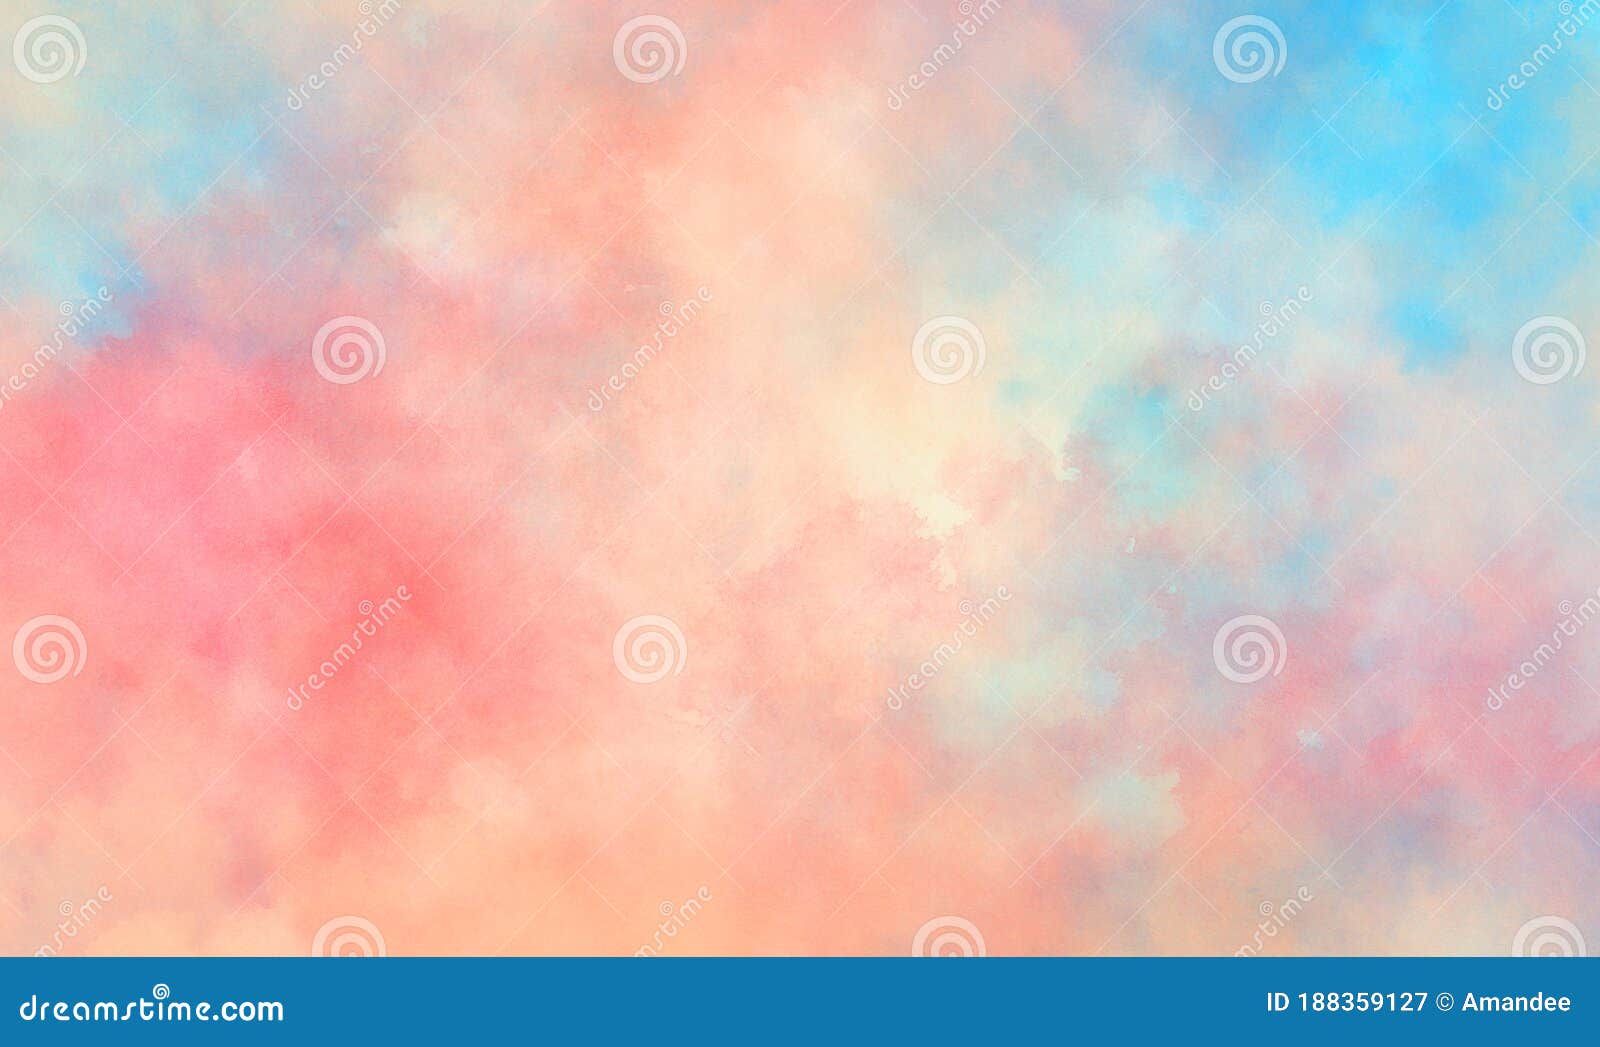 colorful watercolor background of abstract sunset sky with puffy clouds in bright painted colors of pink blue and white